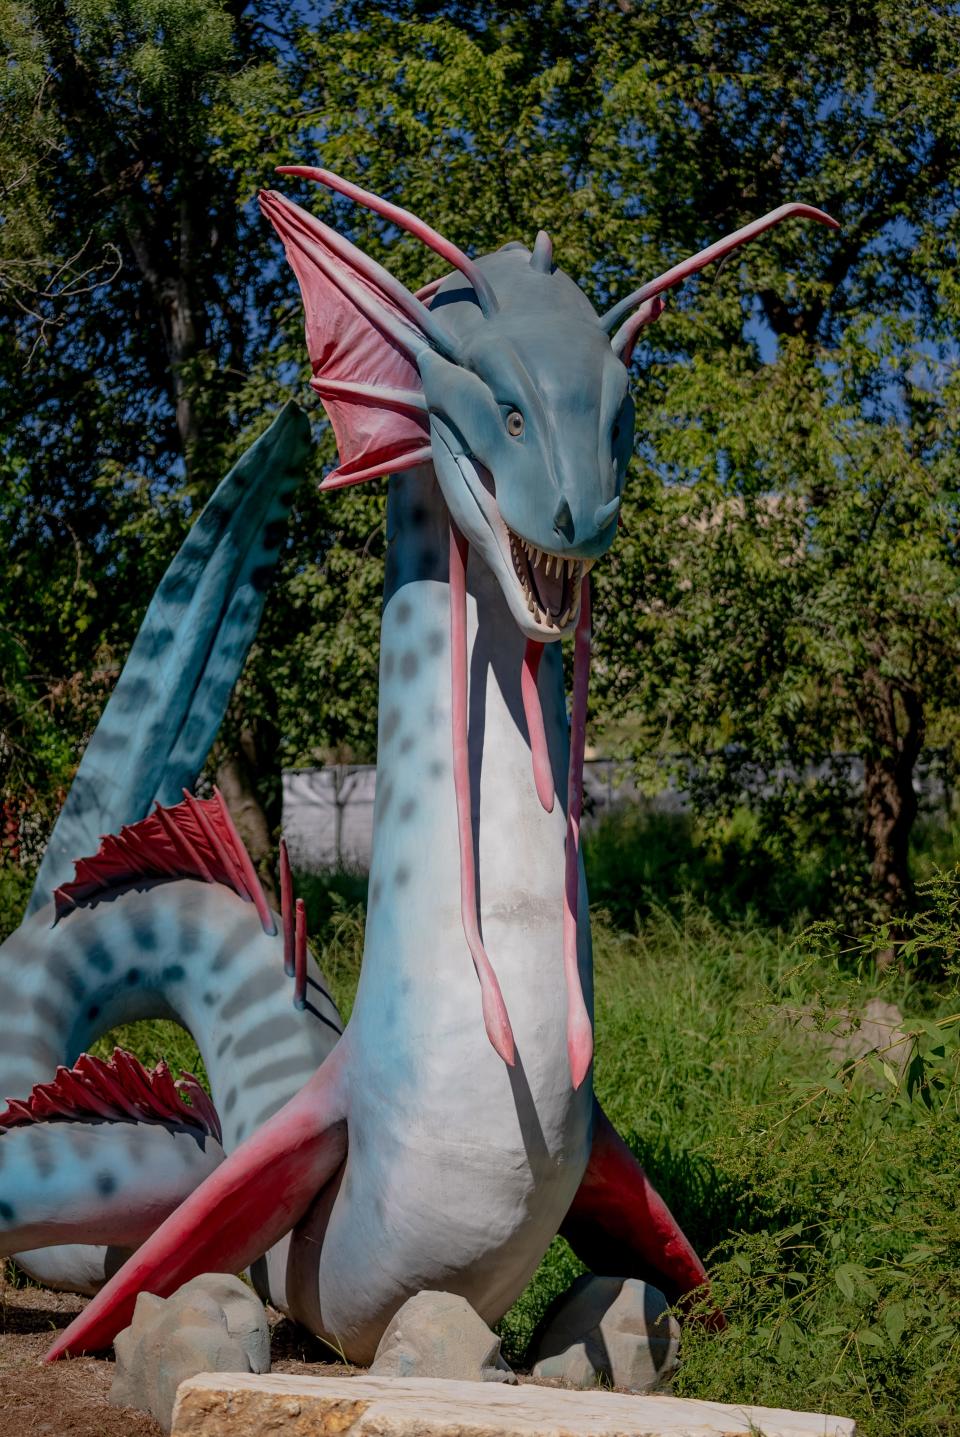 Sea Serpent is one of the robotic dragons that will be on display at the Milwaukee County Zoo from Memorial Day weekend through Labor Day weekend.